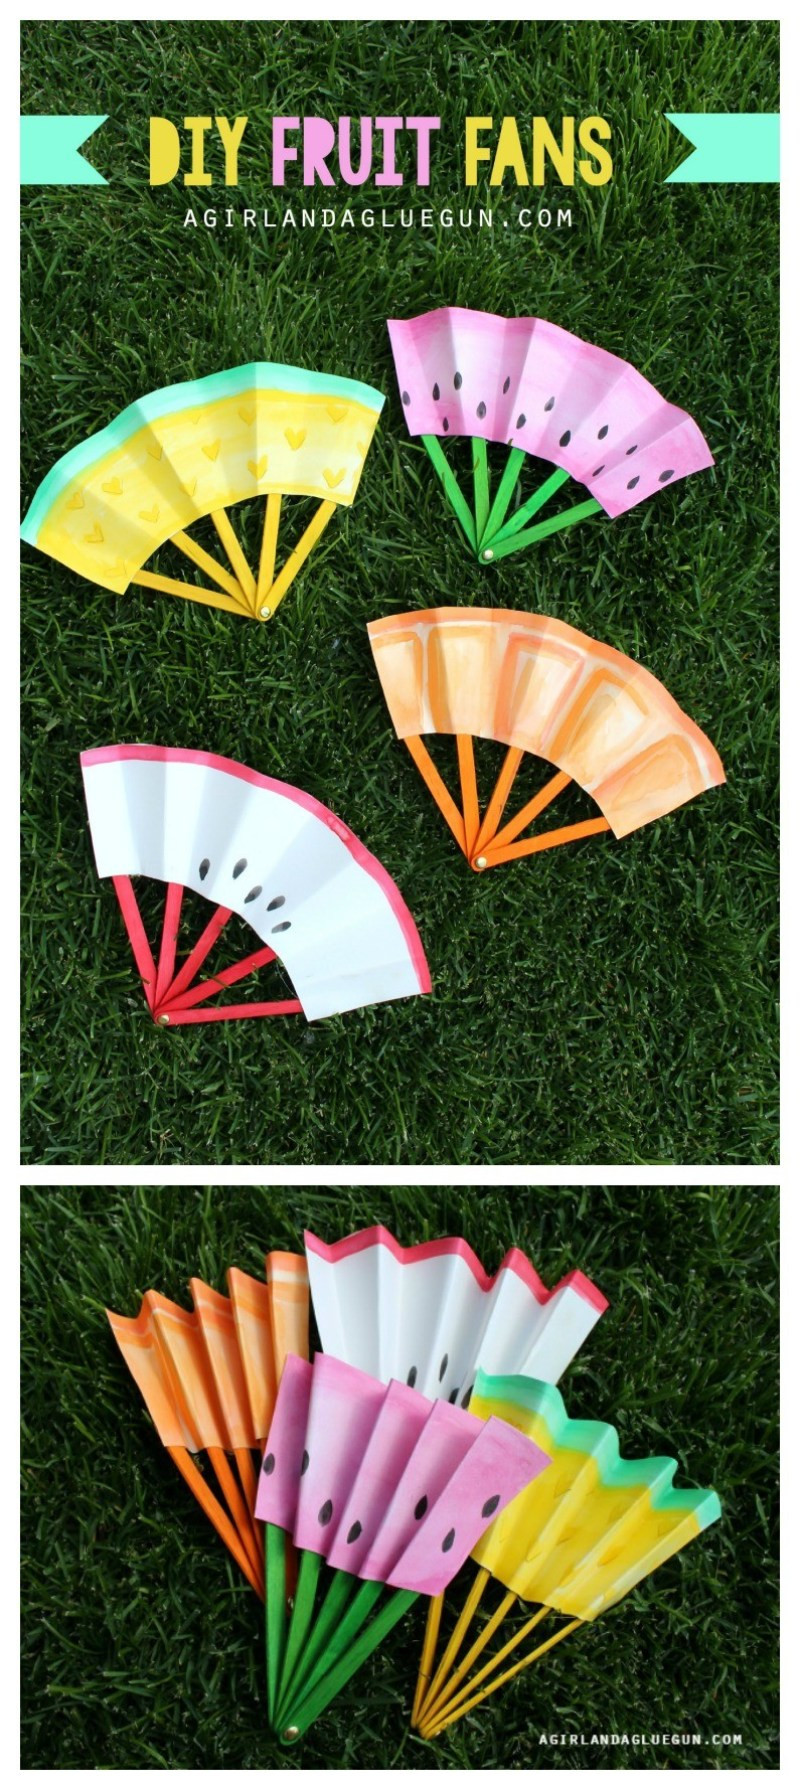 Cool DIY Projects For Kids
 12 Favorite Easy Summer Crafts for Kids on Love the Day